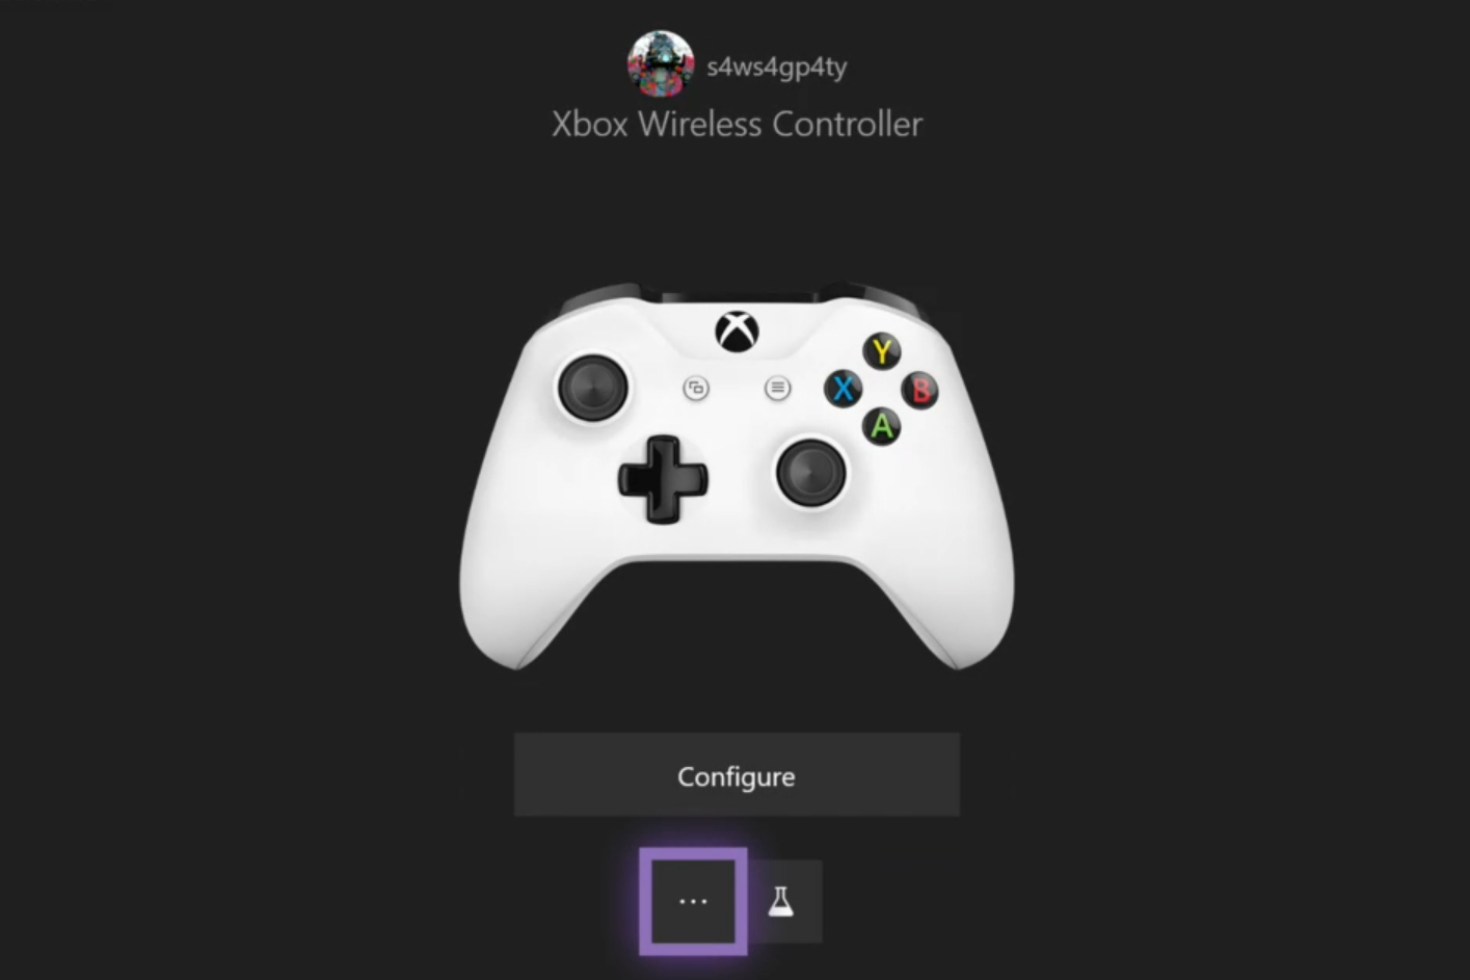 how to play xbox cloud gaming on sony smart tv｜TikTok Search